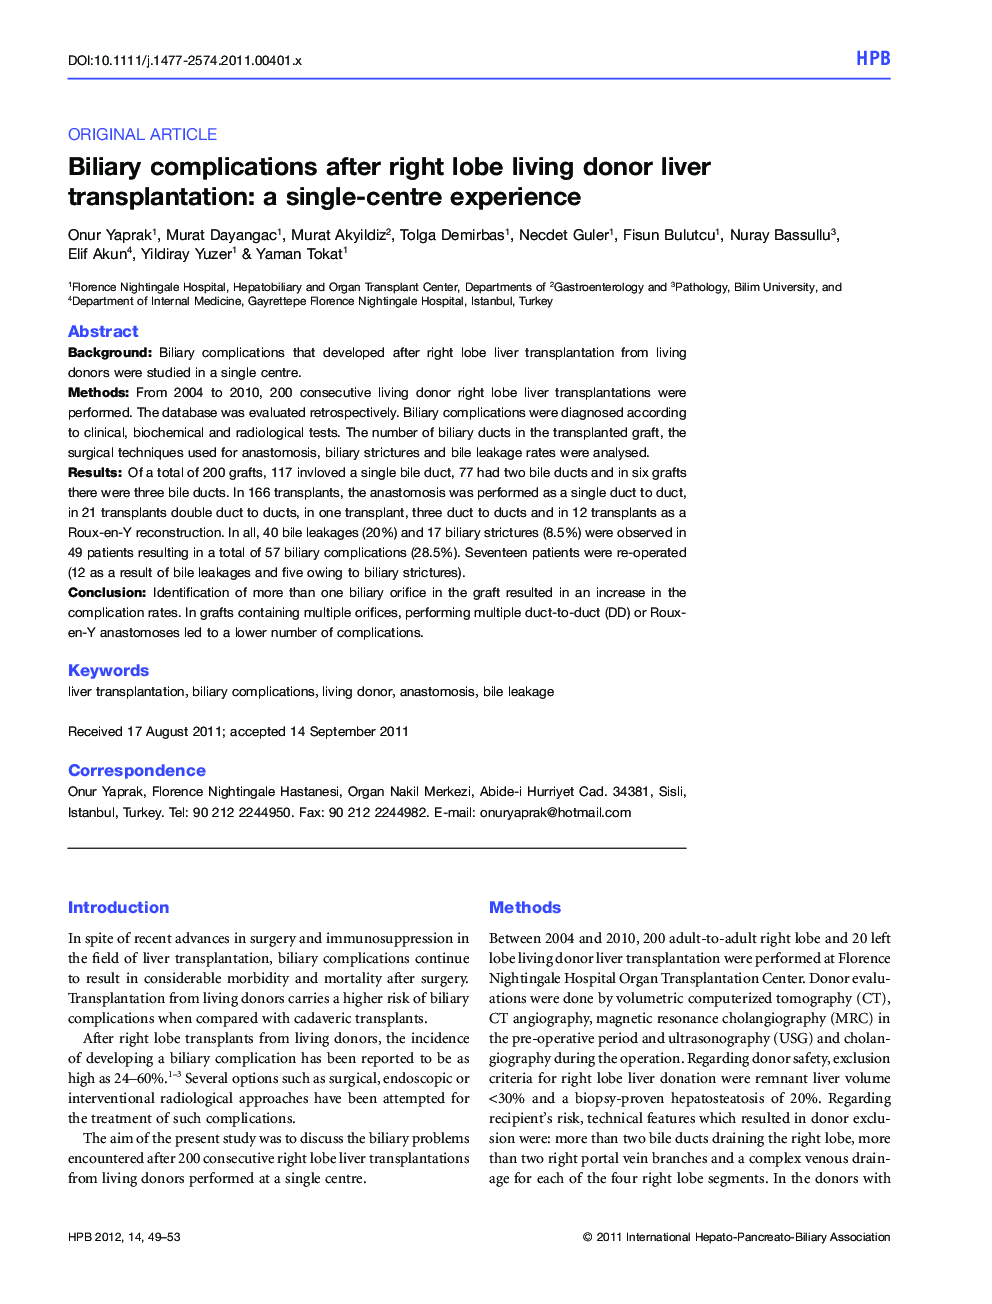 Biliary complications after right lobe living donor liver transplantation: a single-centre experience